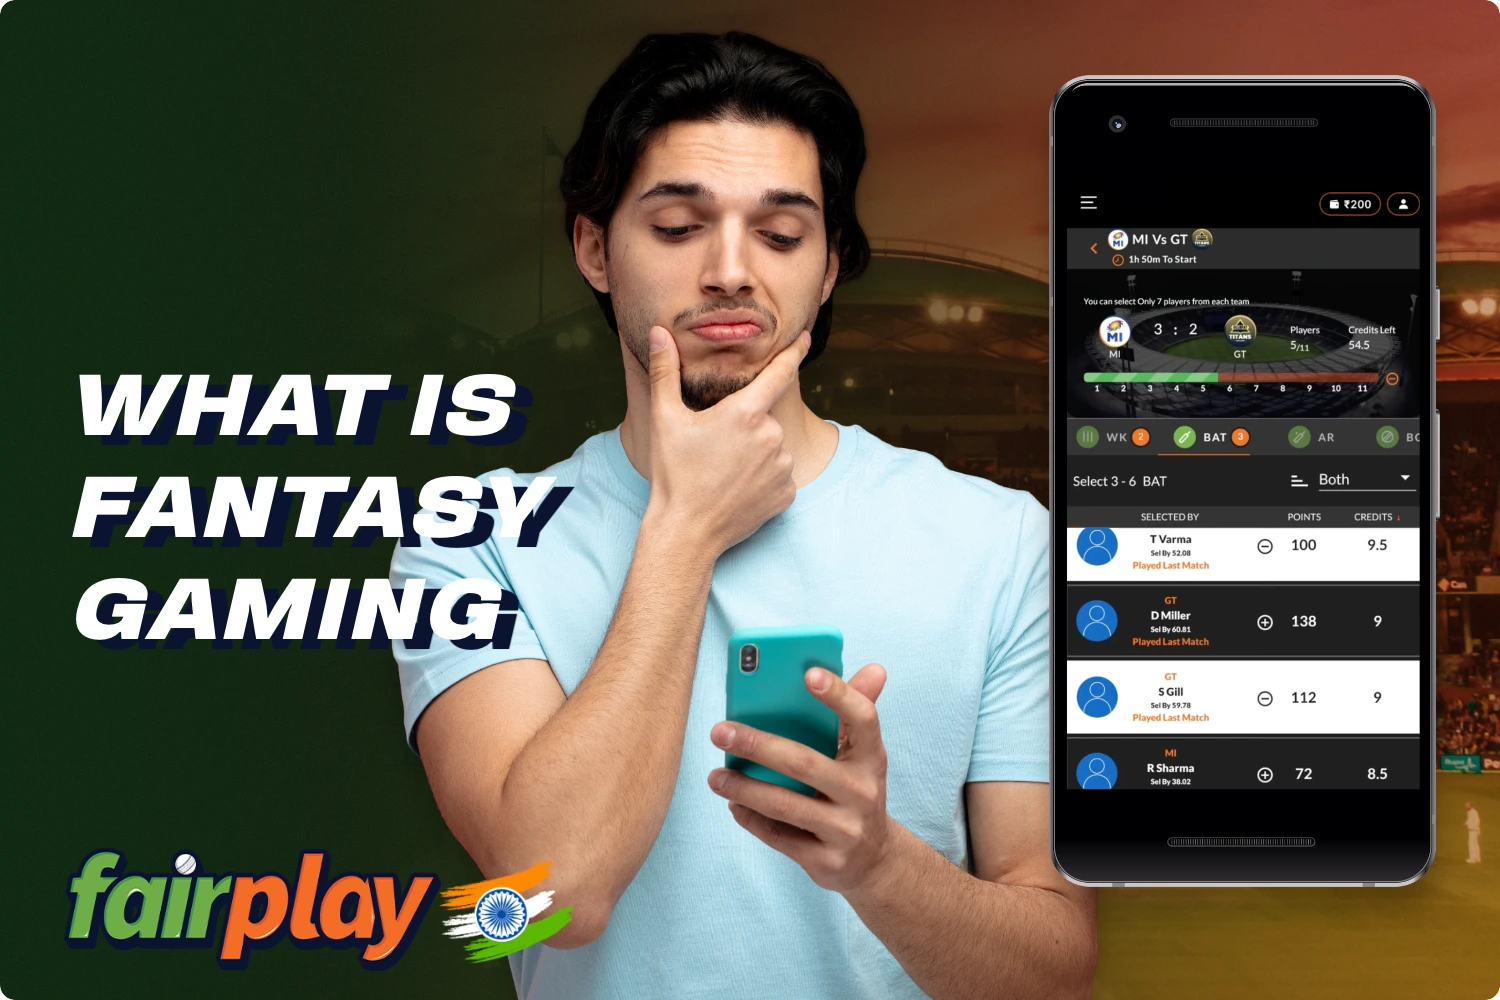 Fantasy betting at Fairplay is a special kind of betting where you have to create a virtual team